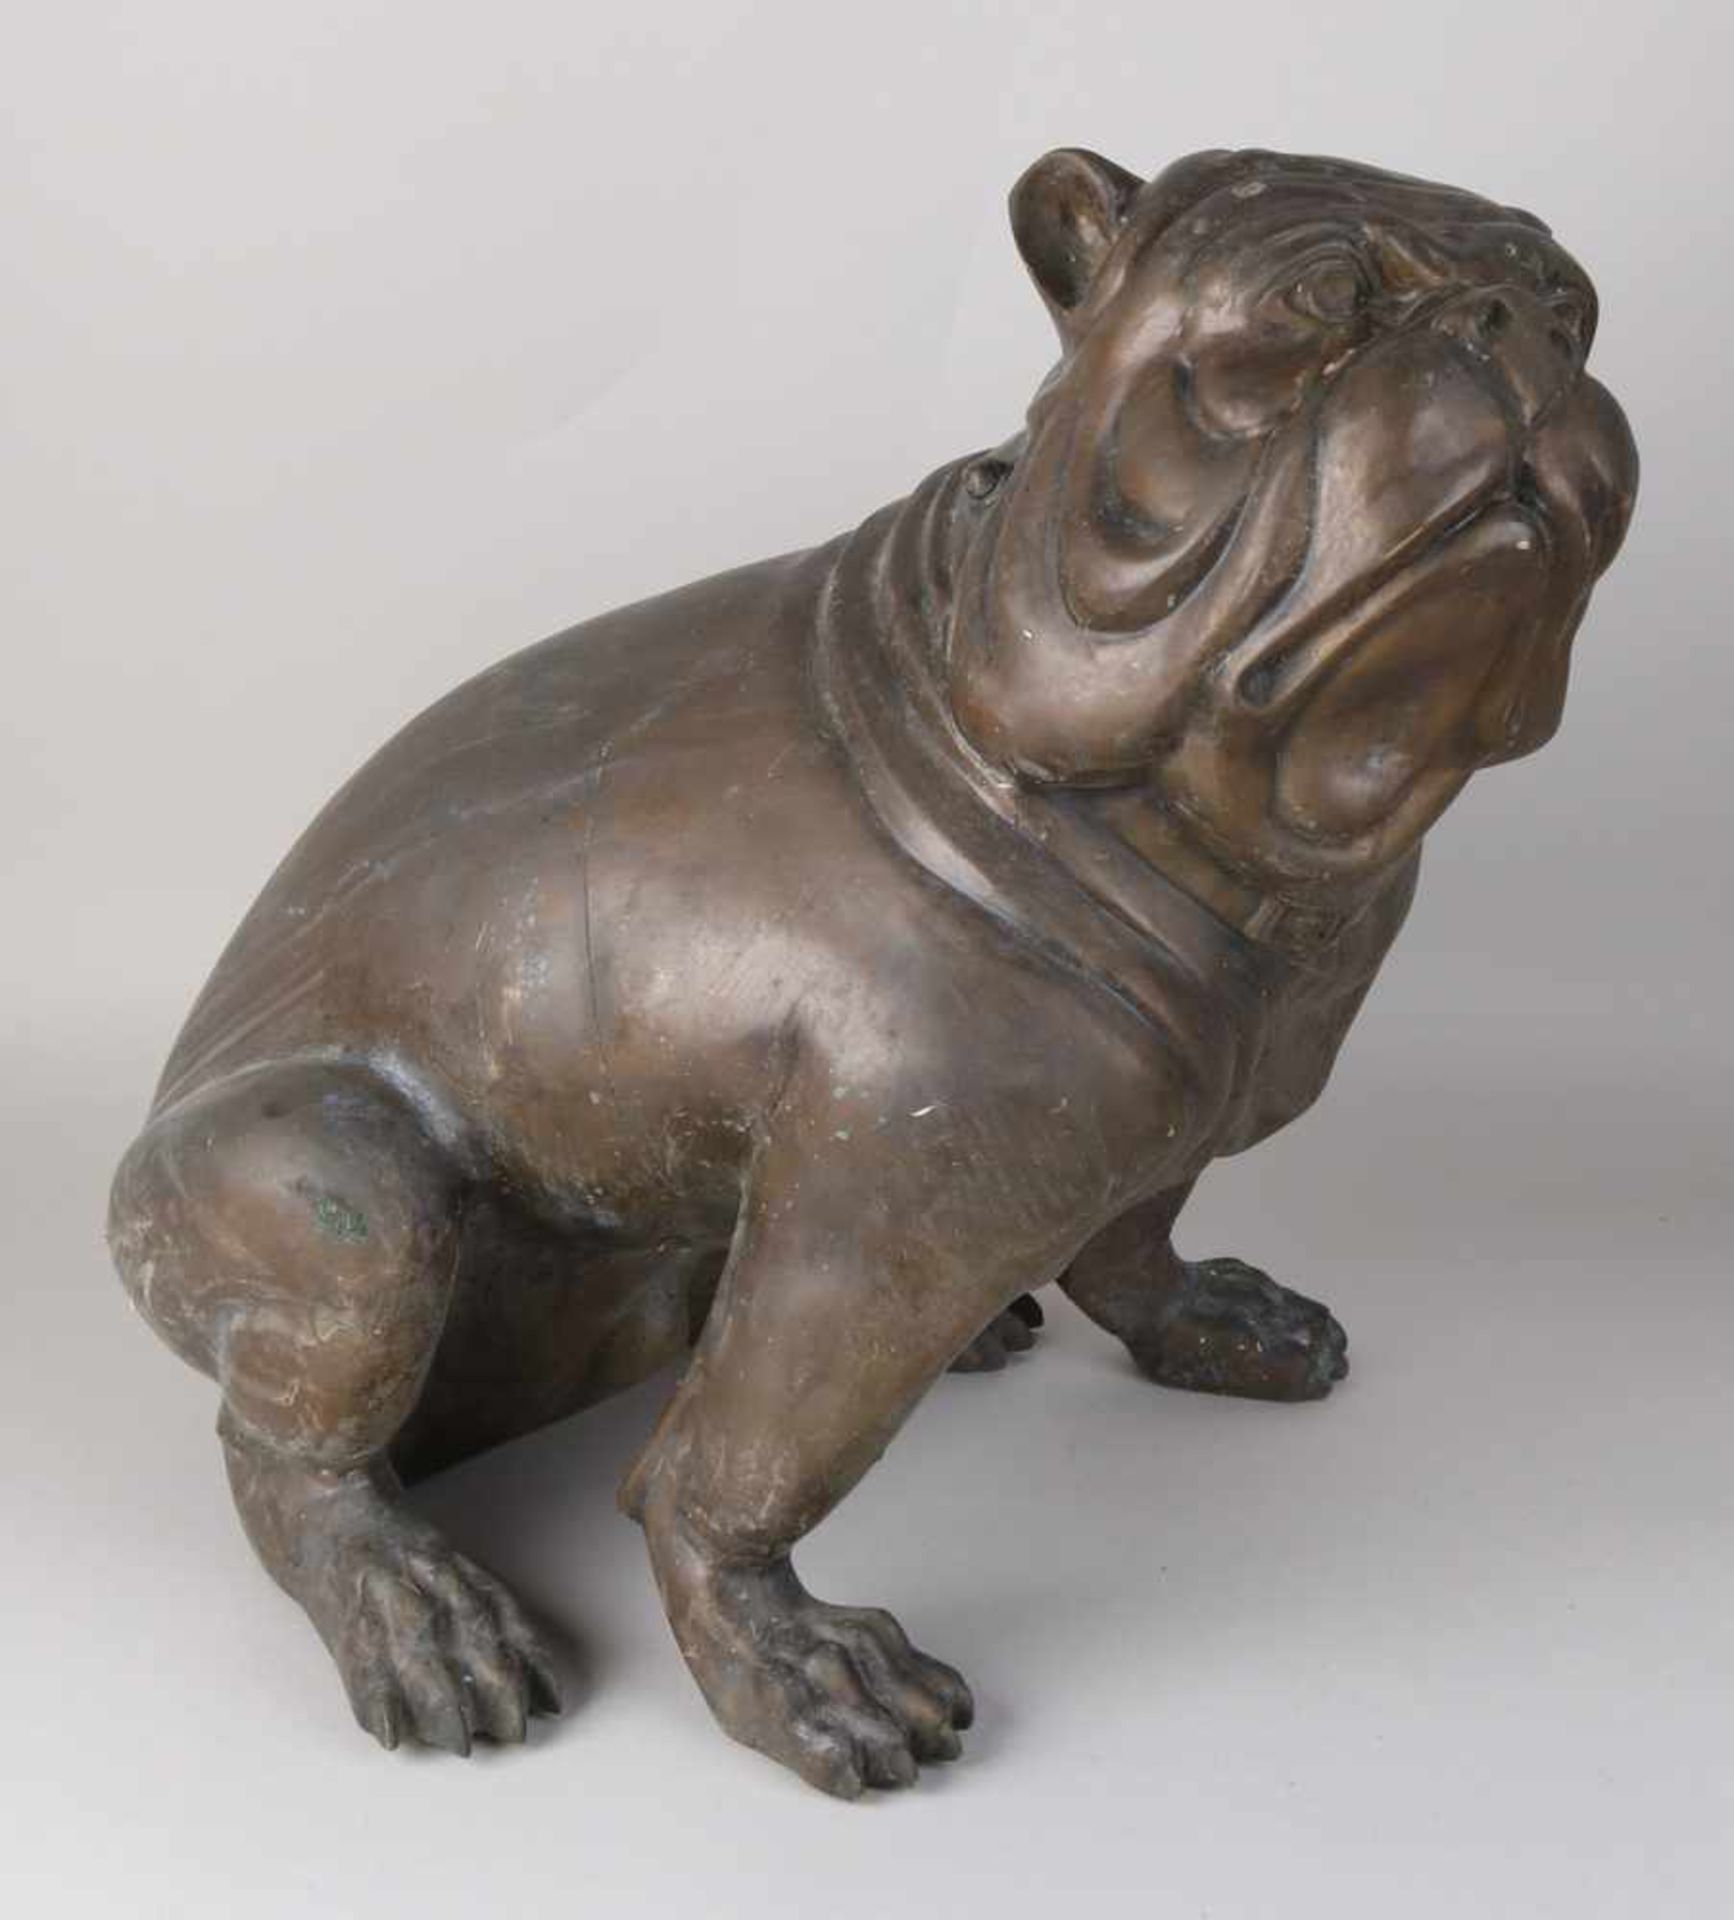 Large bronze dog. Bulldog. Late 20th century. Dimensions: 54 x 54 x 35 cm. In good condition.